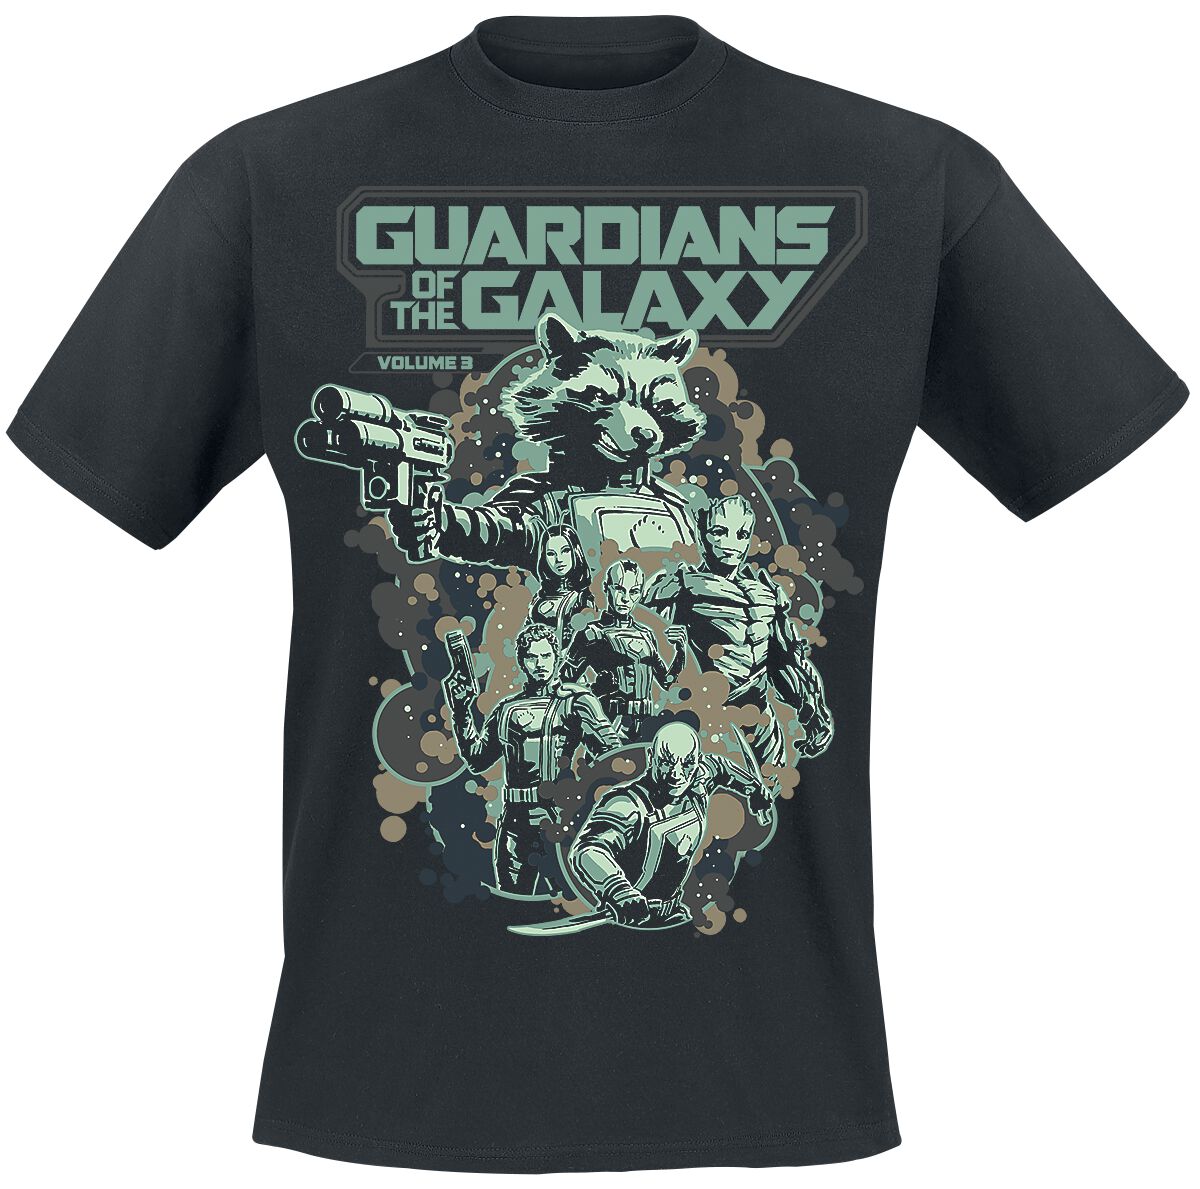 Guardians Of The Galaxy Vol. 3 - Galactic Heroes T-Shirt schwarz in S